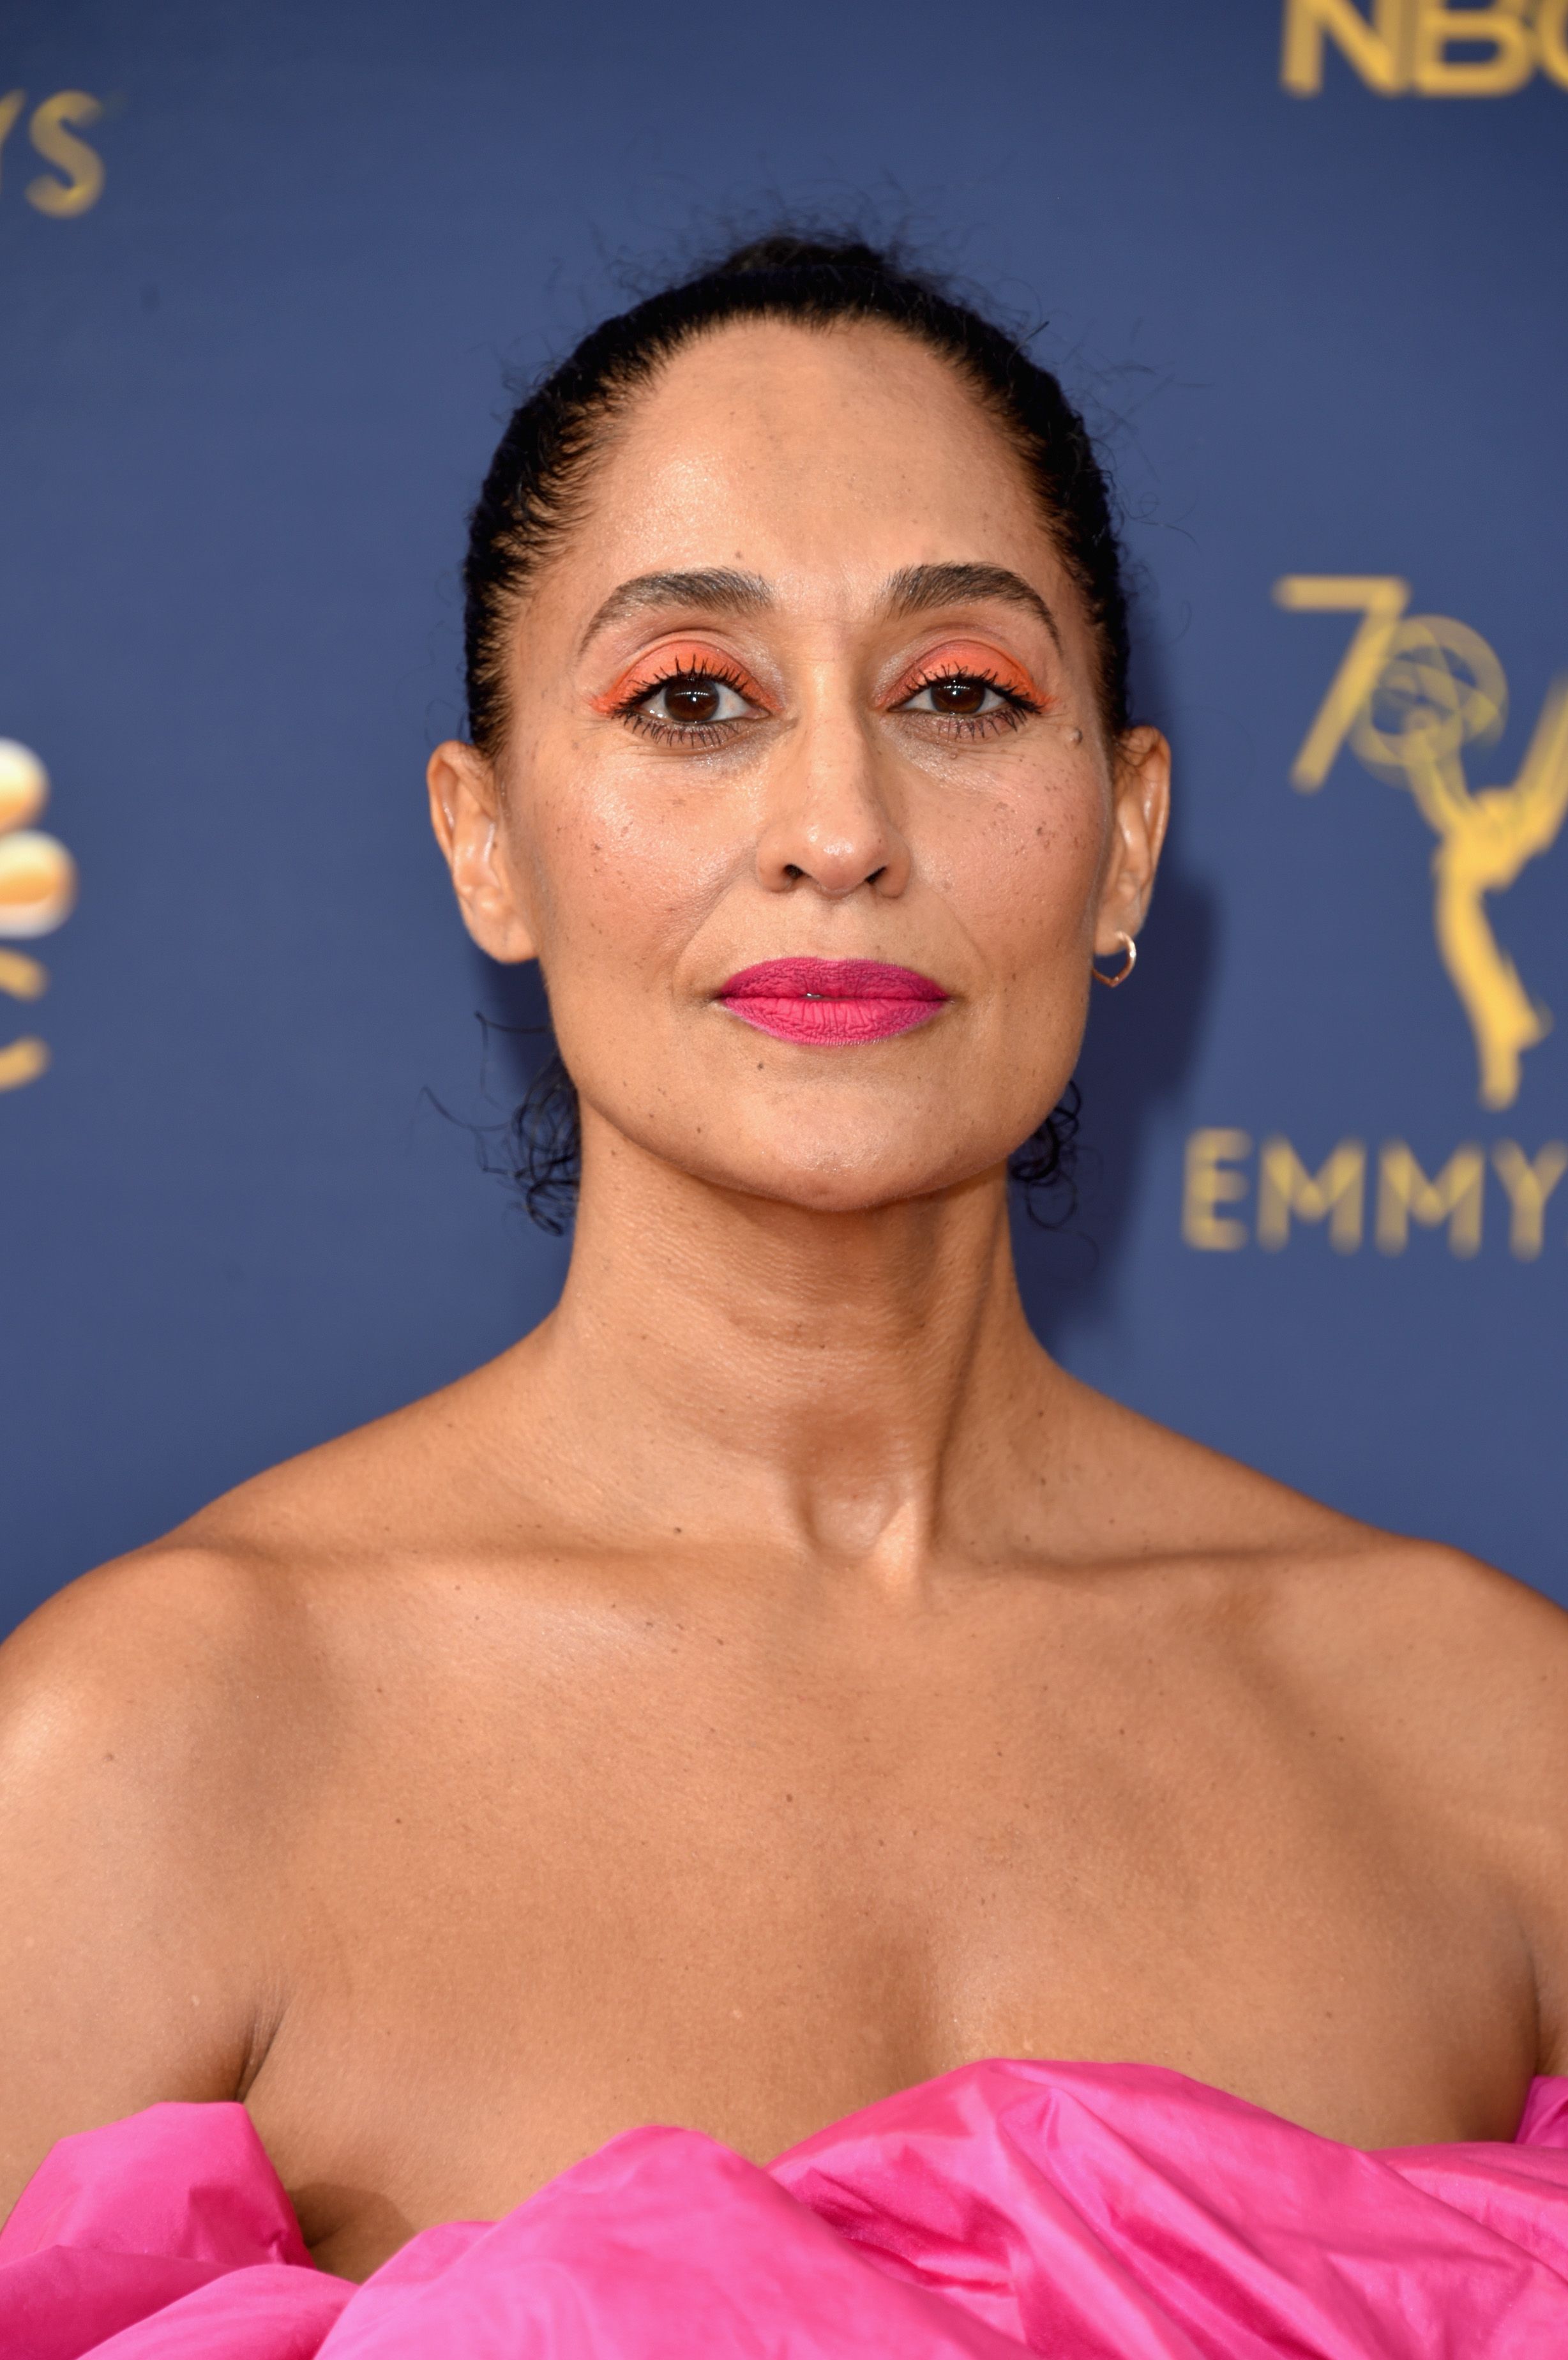 Tracee Ross Practically Invented Wearing Pink for the Carpet